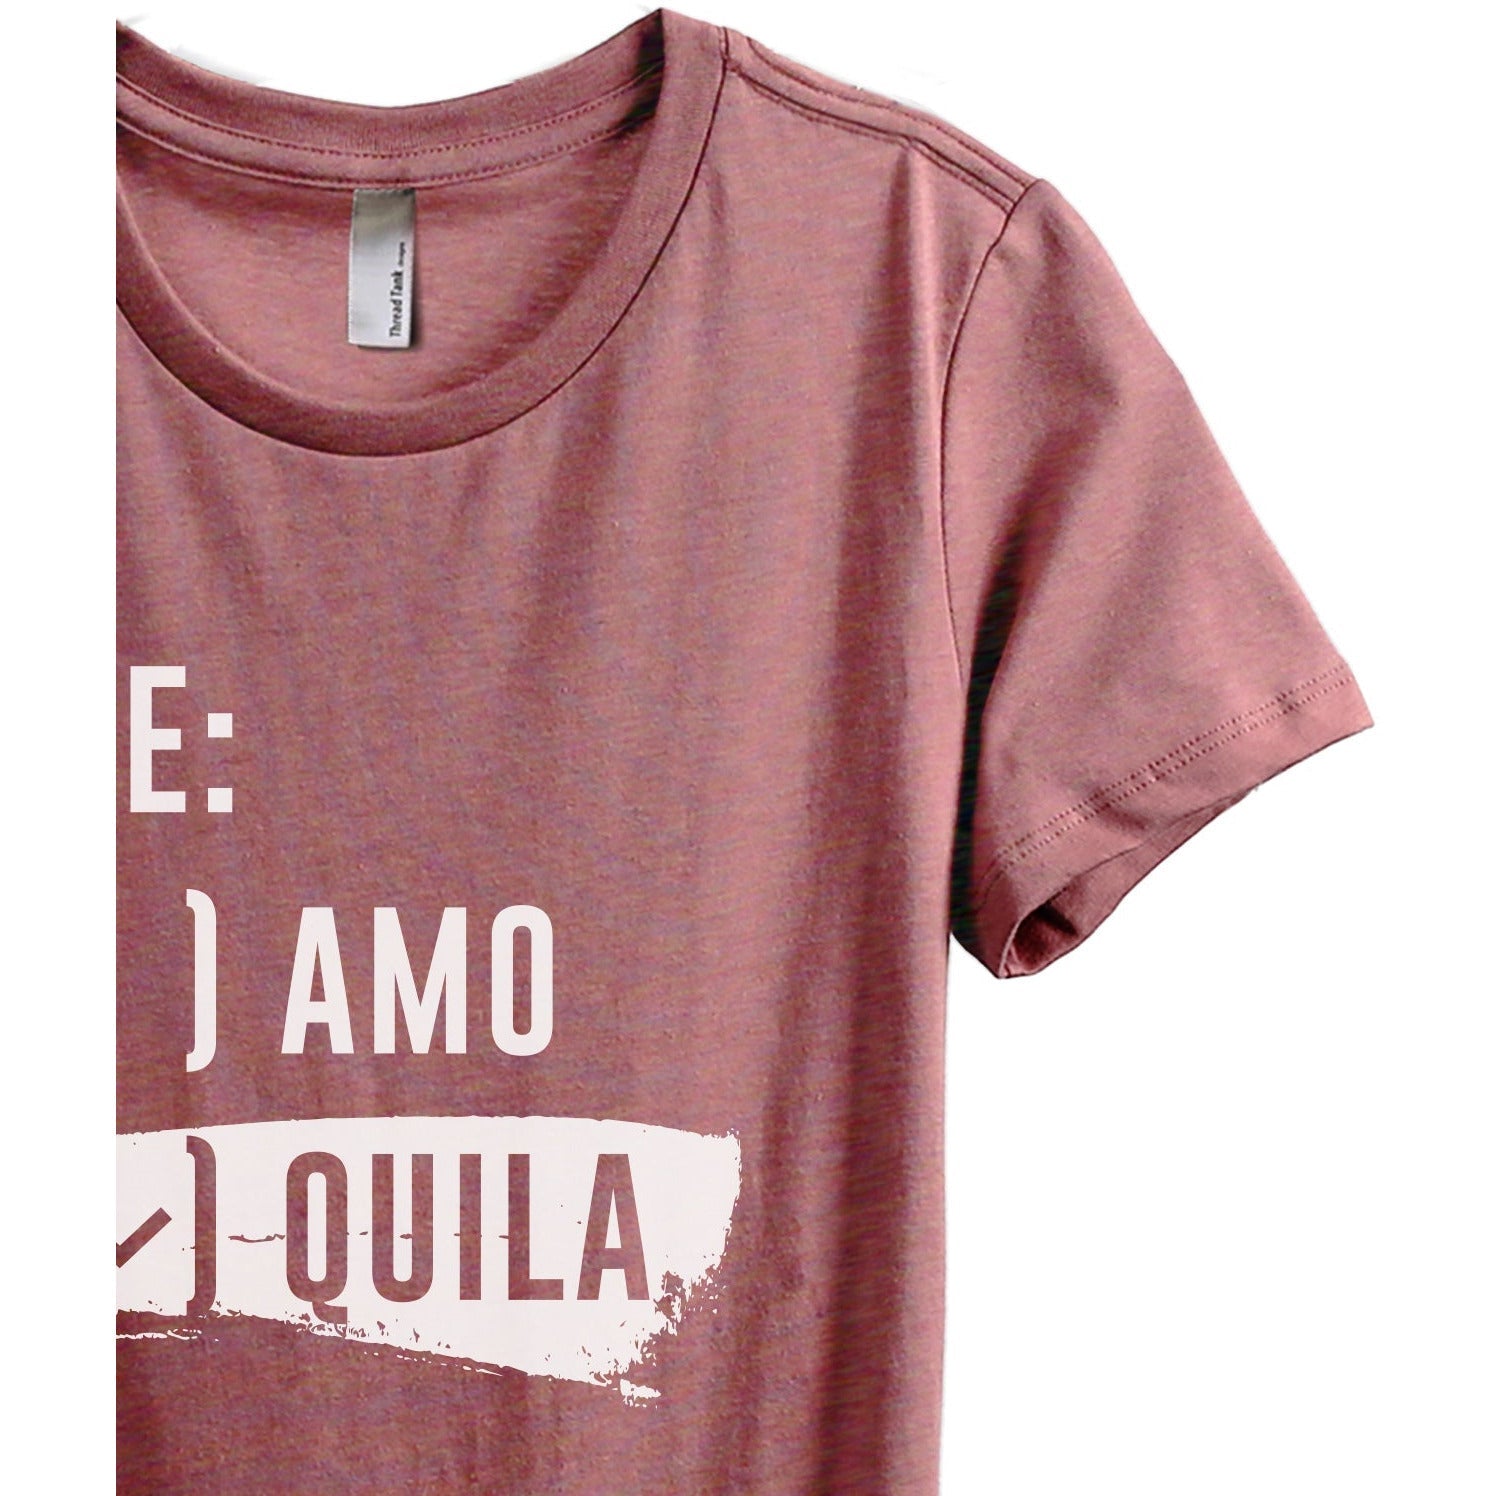 Te Quila - Stories You Can Wear